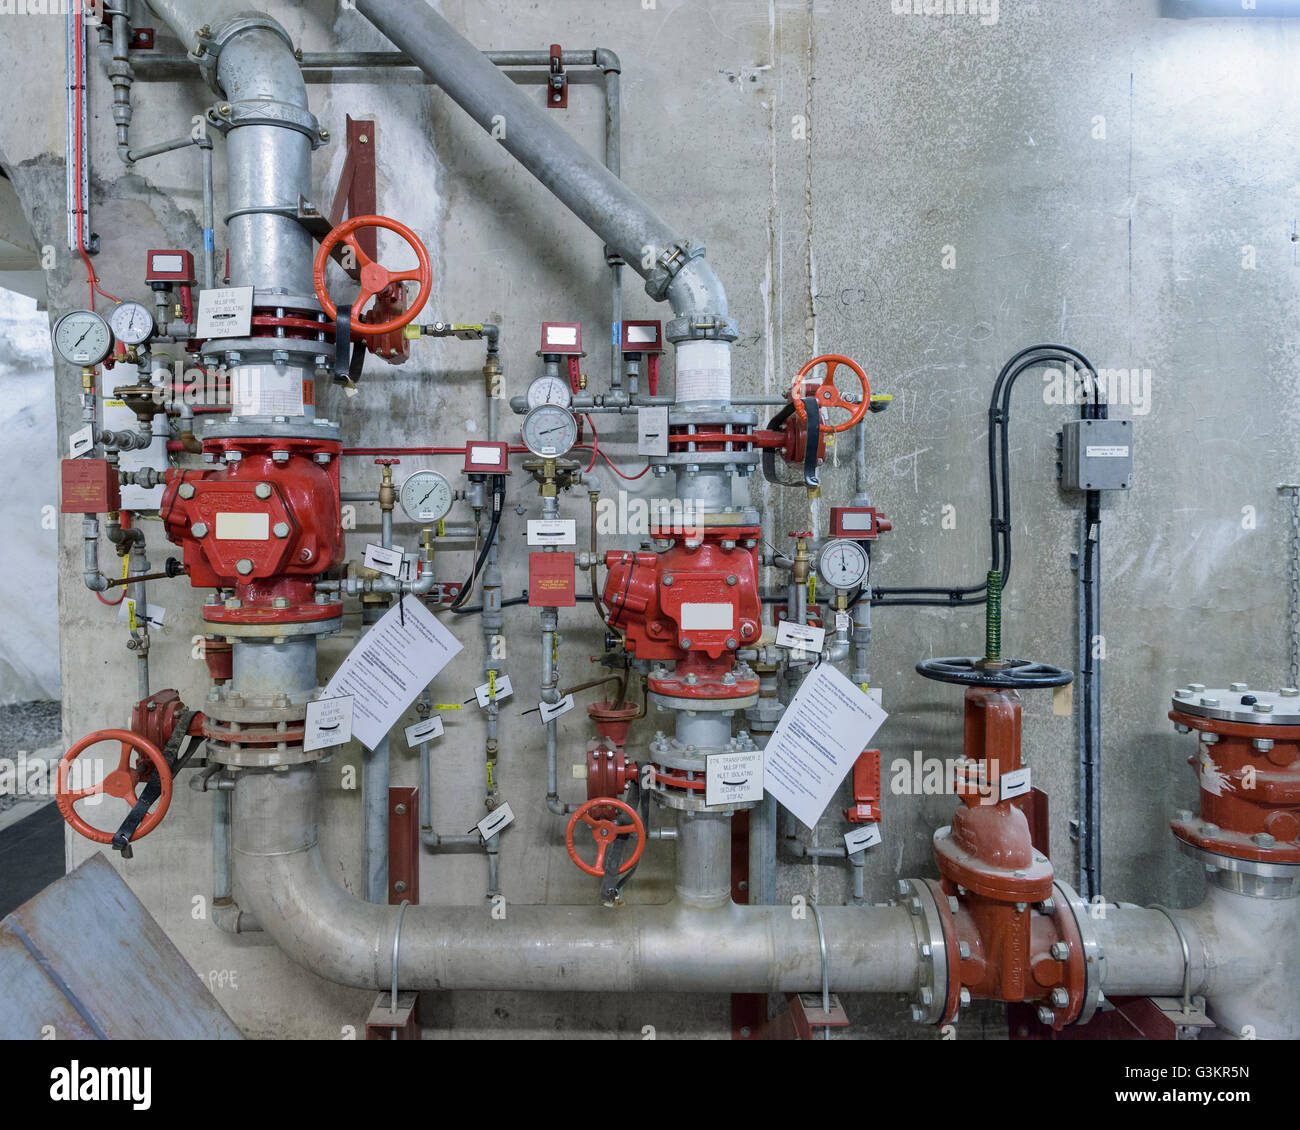 Fire control system in hydroelectric power station Stock Photo